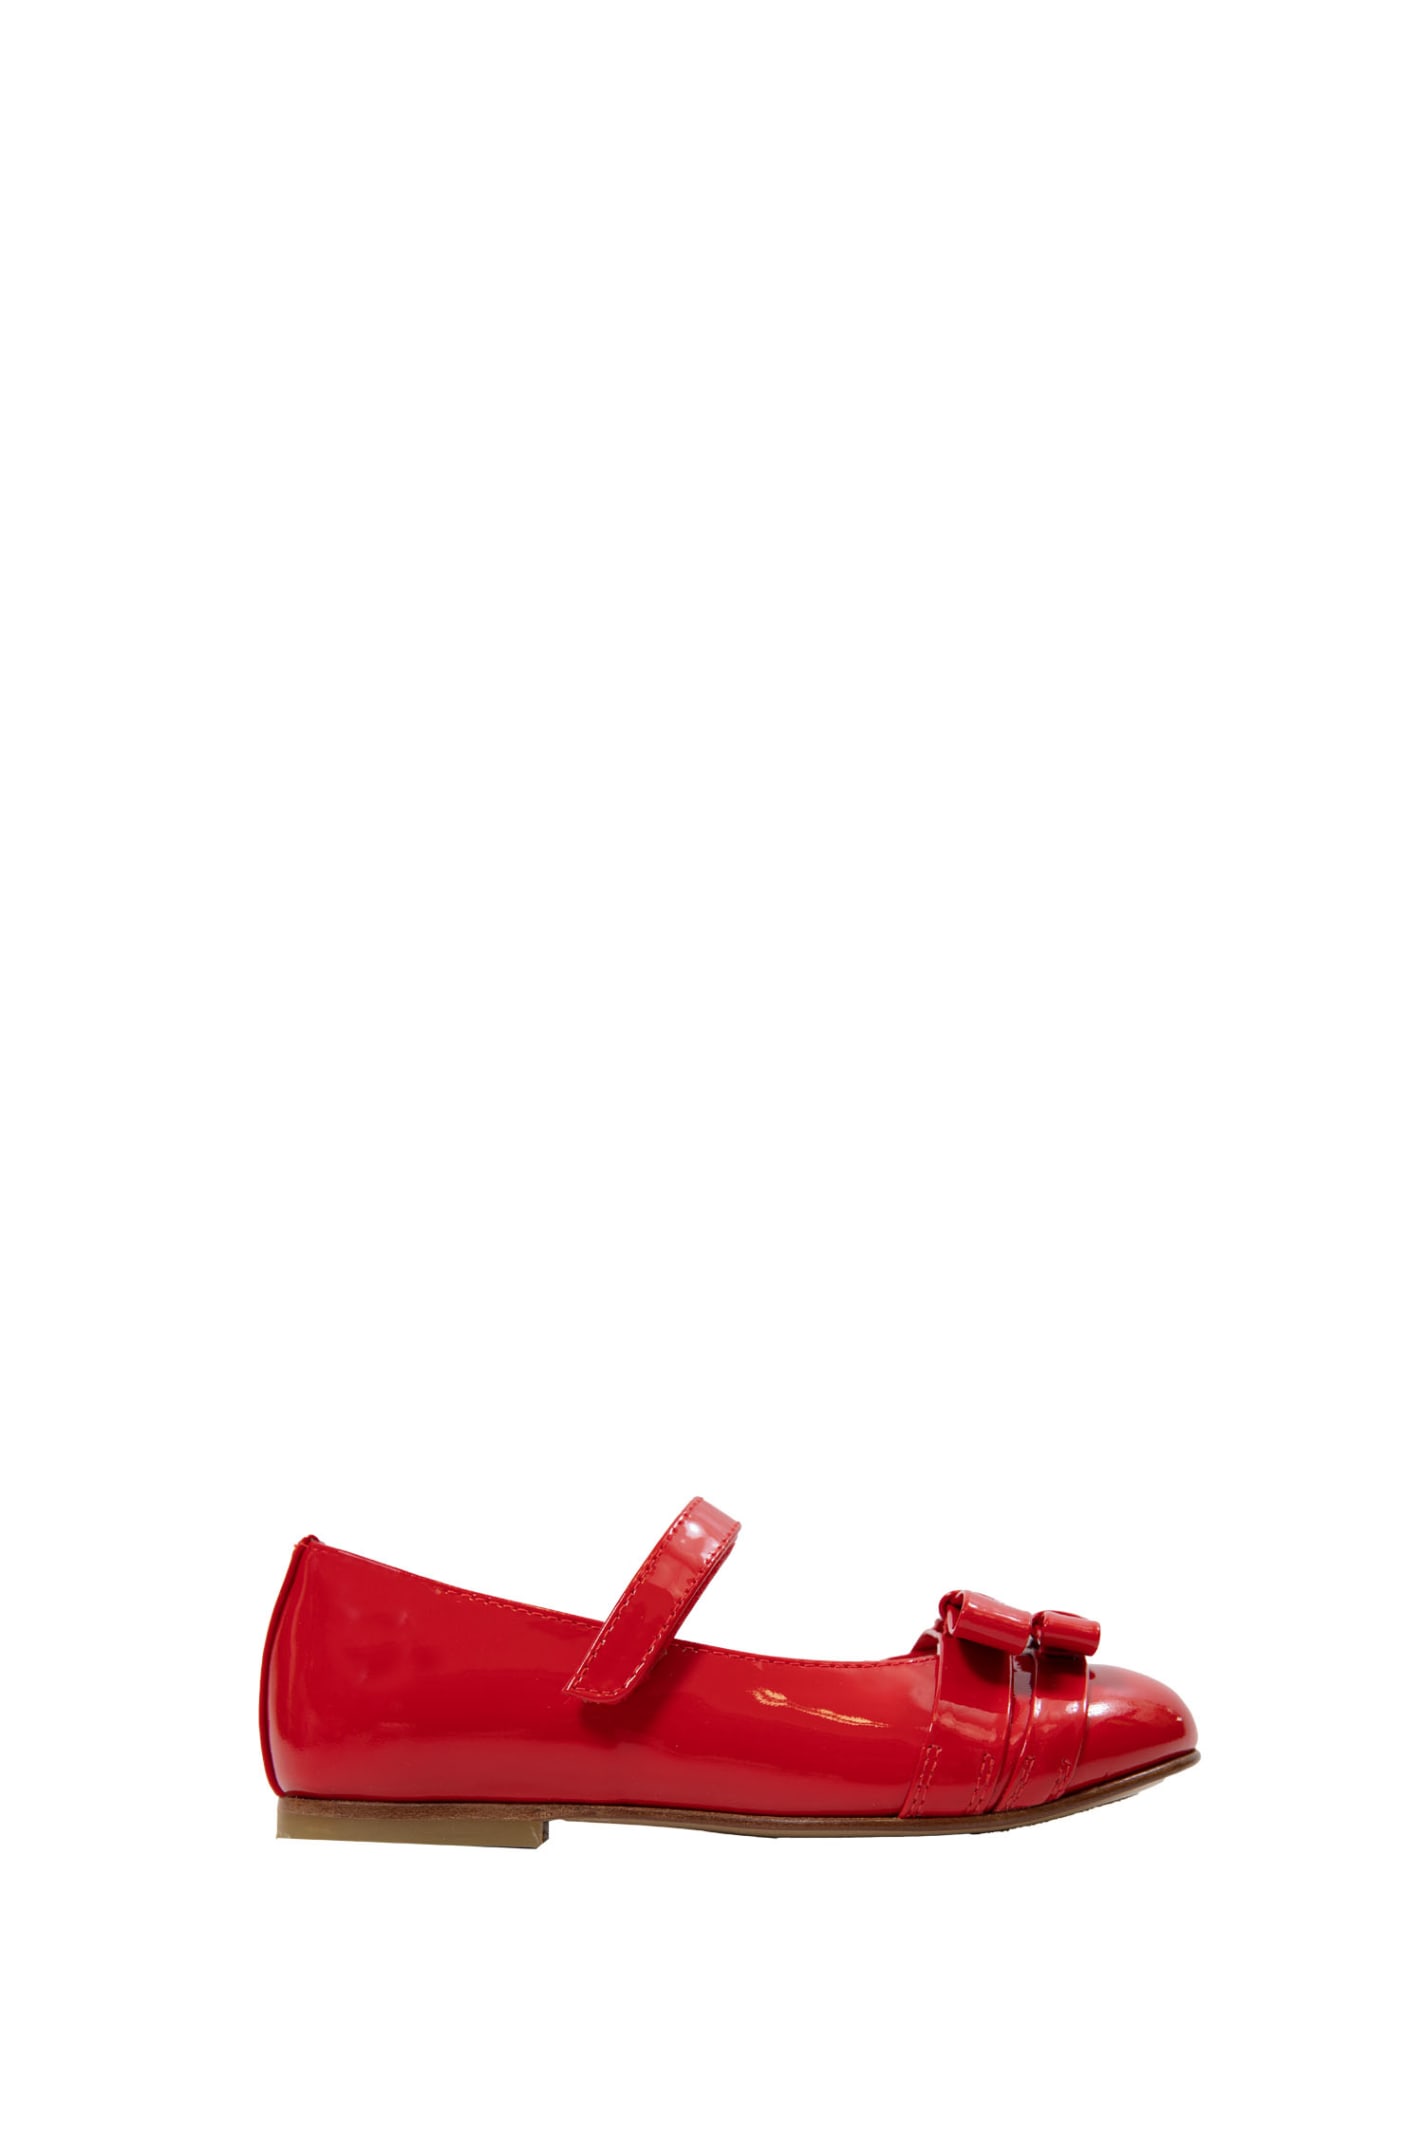 Andrea Montelpare Kids' Patent Leather Shoes In Red